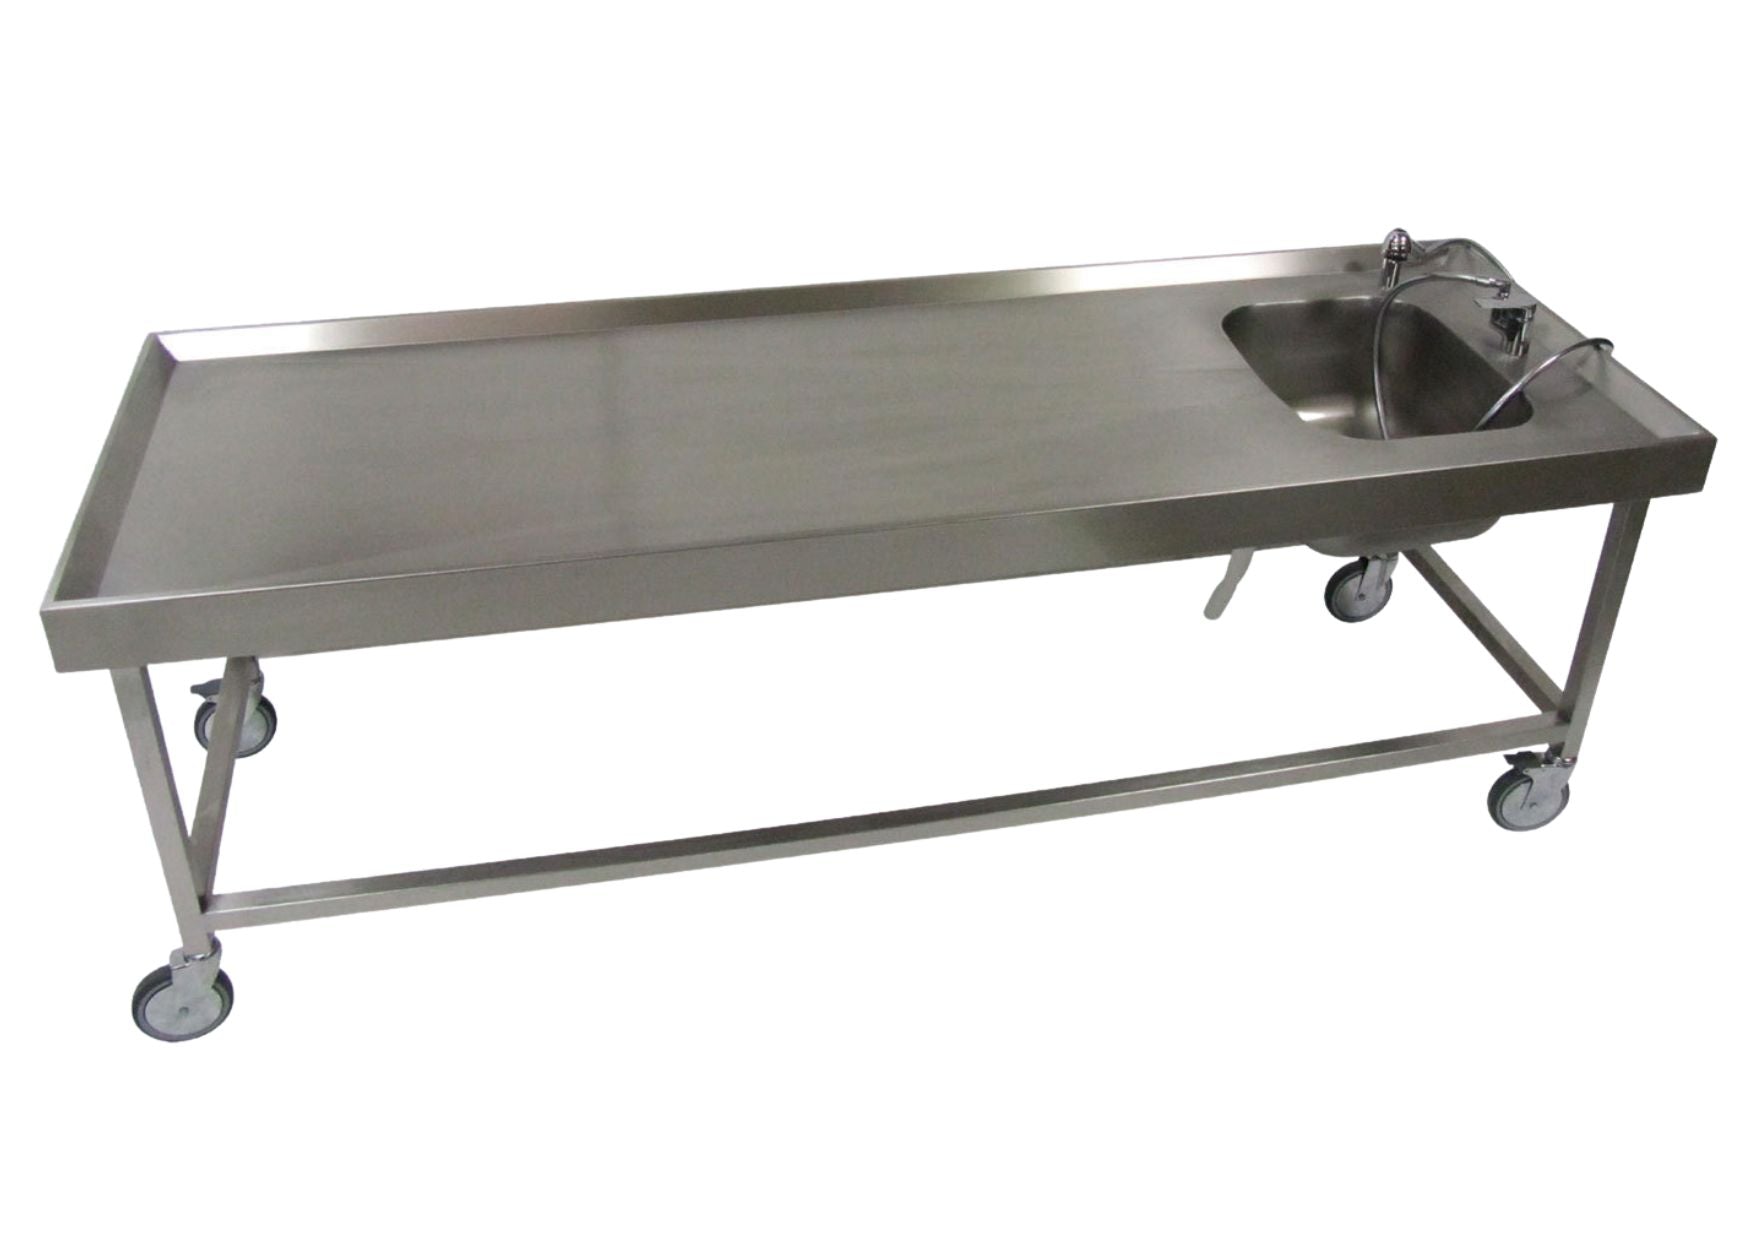 Stainless steel mobile dissection table with washbasin